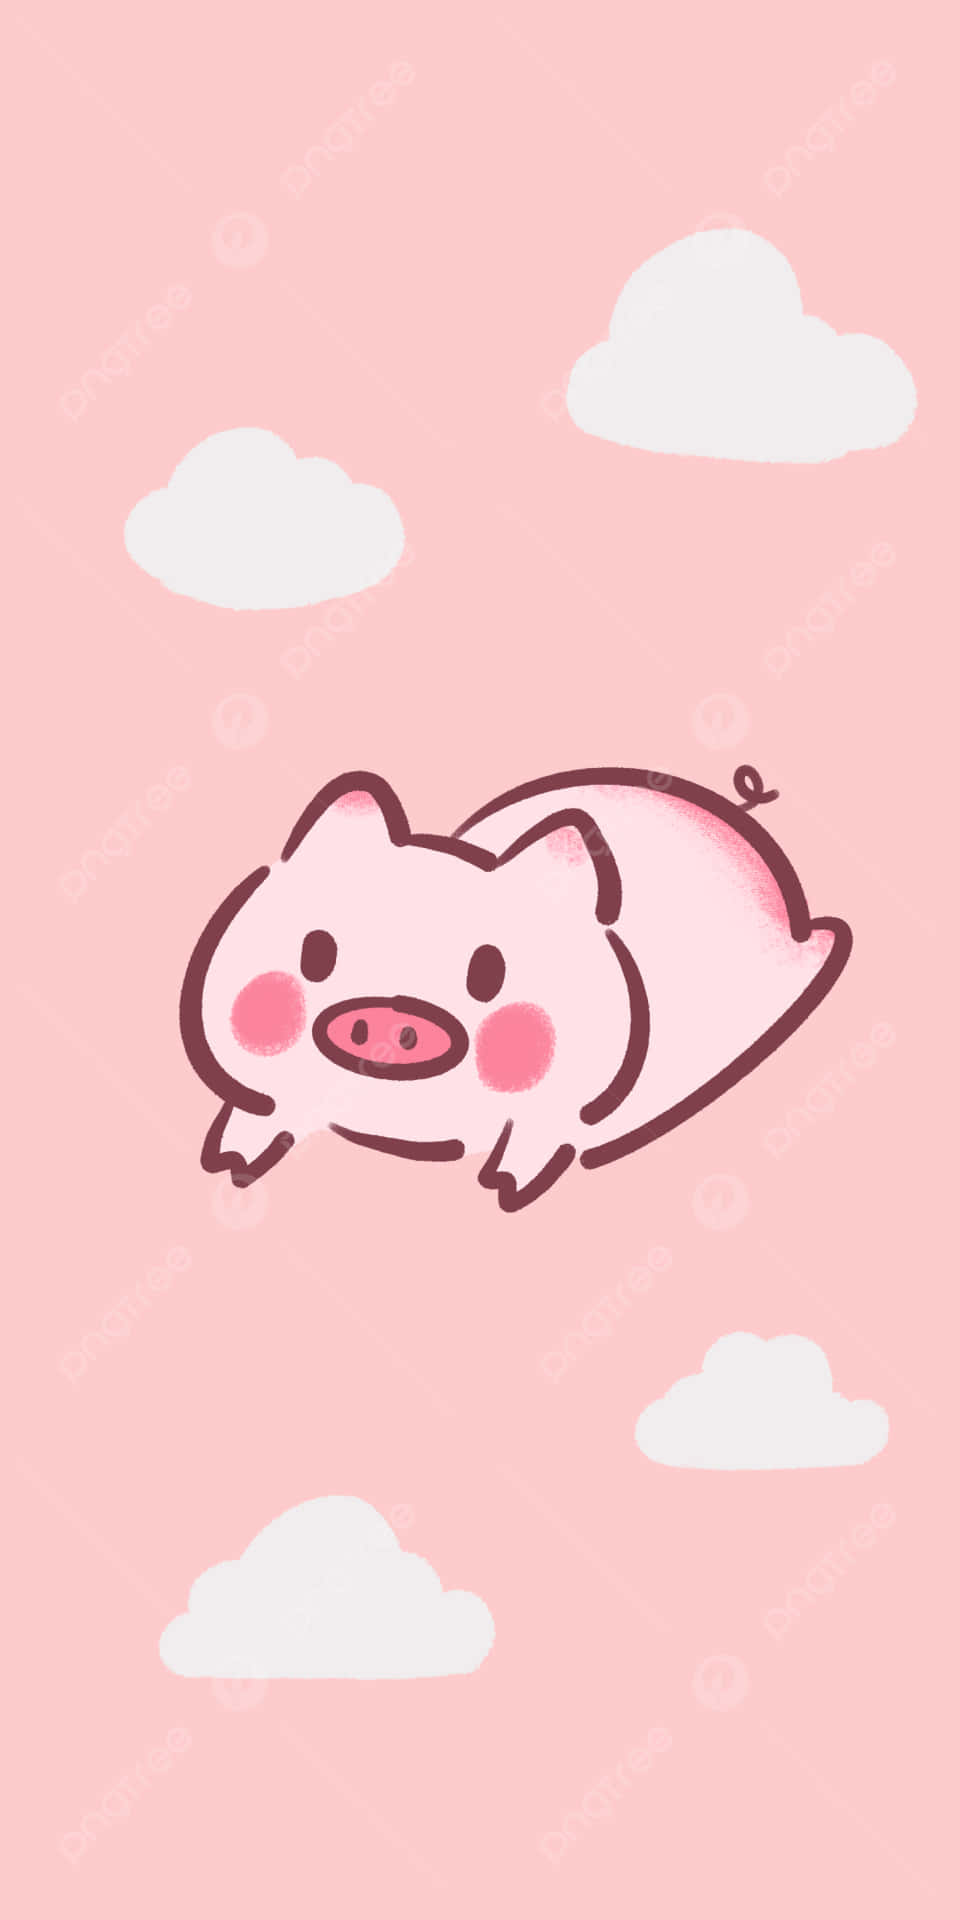 A Cute Pig Flying In The Sky With Clouds Wallpaper